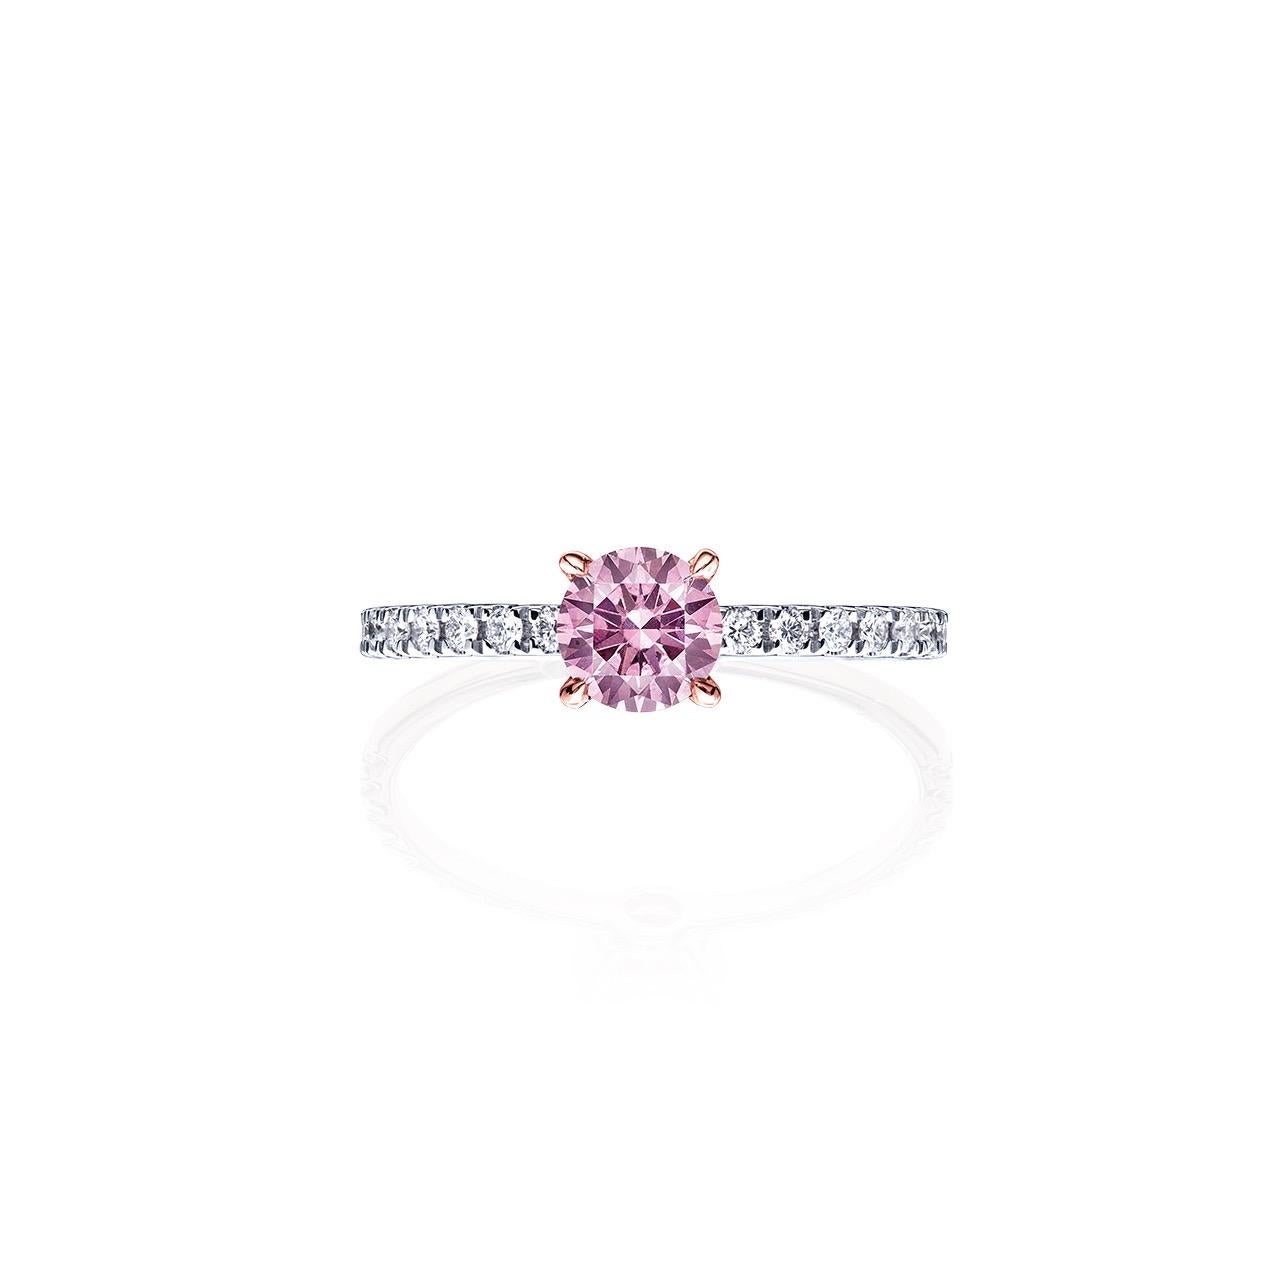 From Emilio Jewelry, a well known and respected wholesaler/dealer located on New York’s iconic Fifth Avenue, 
Featuring an investment Argyle diamond just over .55ct Fancy Purplish Pink 7PP.
Please inquire for more images, certificates, details, and